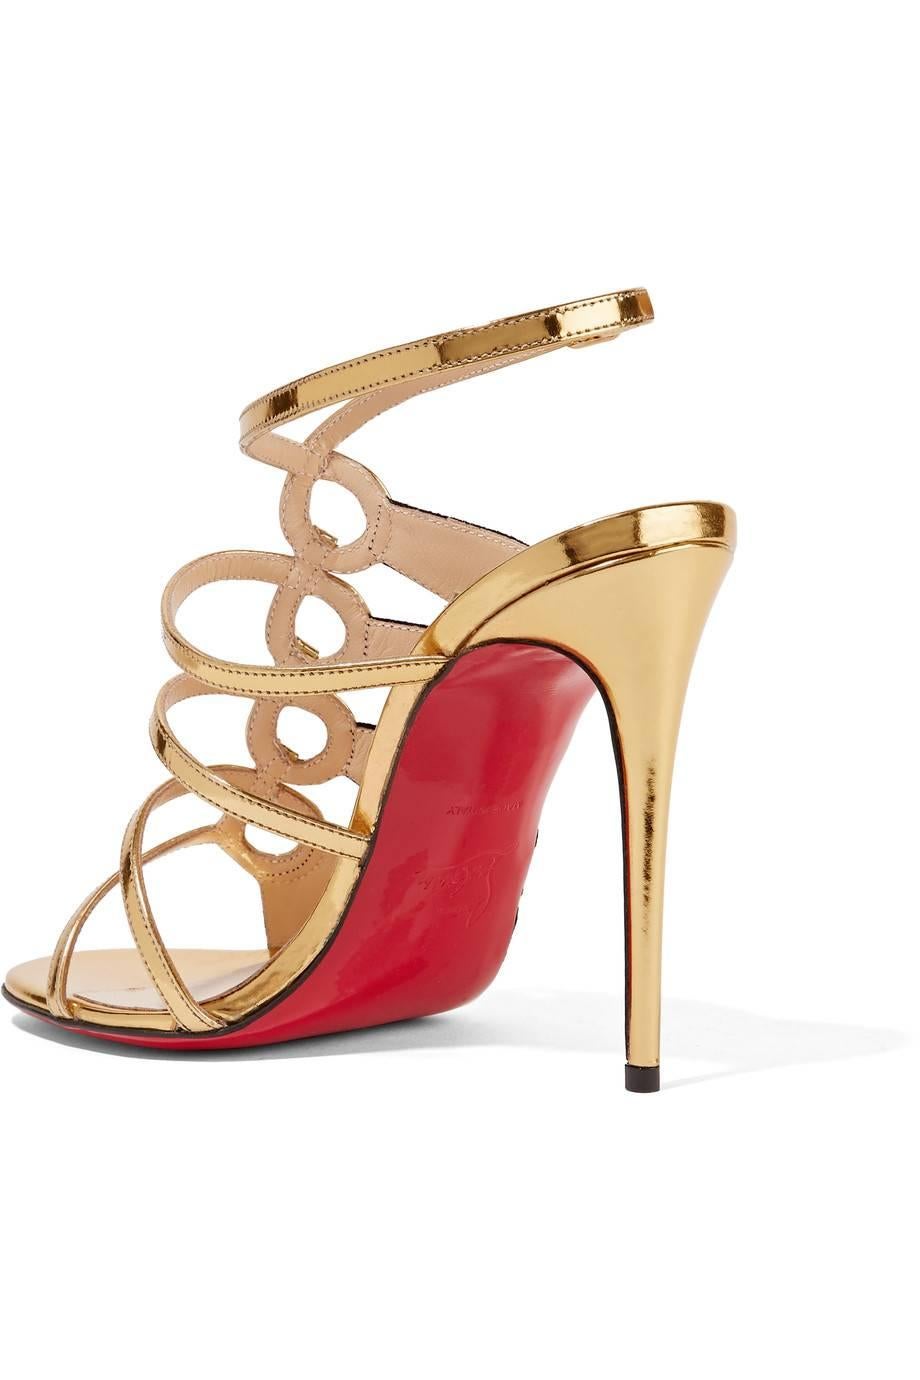 Christian Louboutin New Black Gold Cut Out Evening Sandals Heels in Box 1